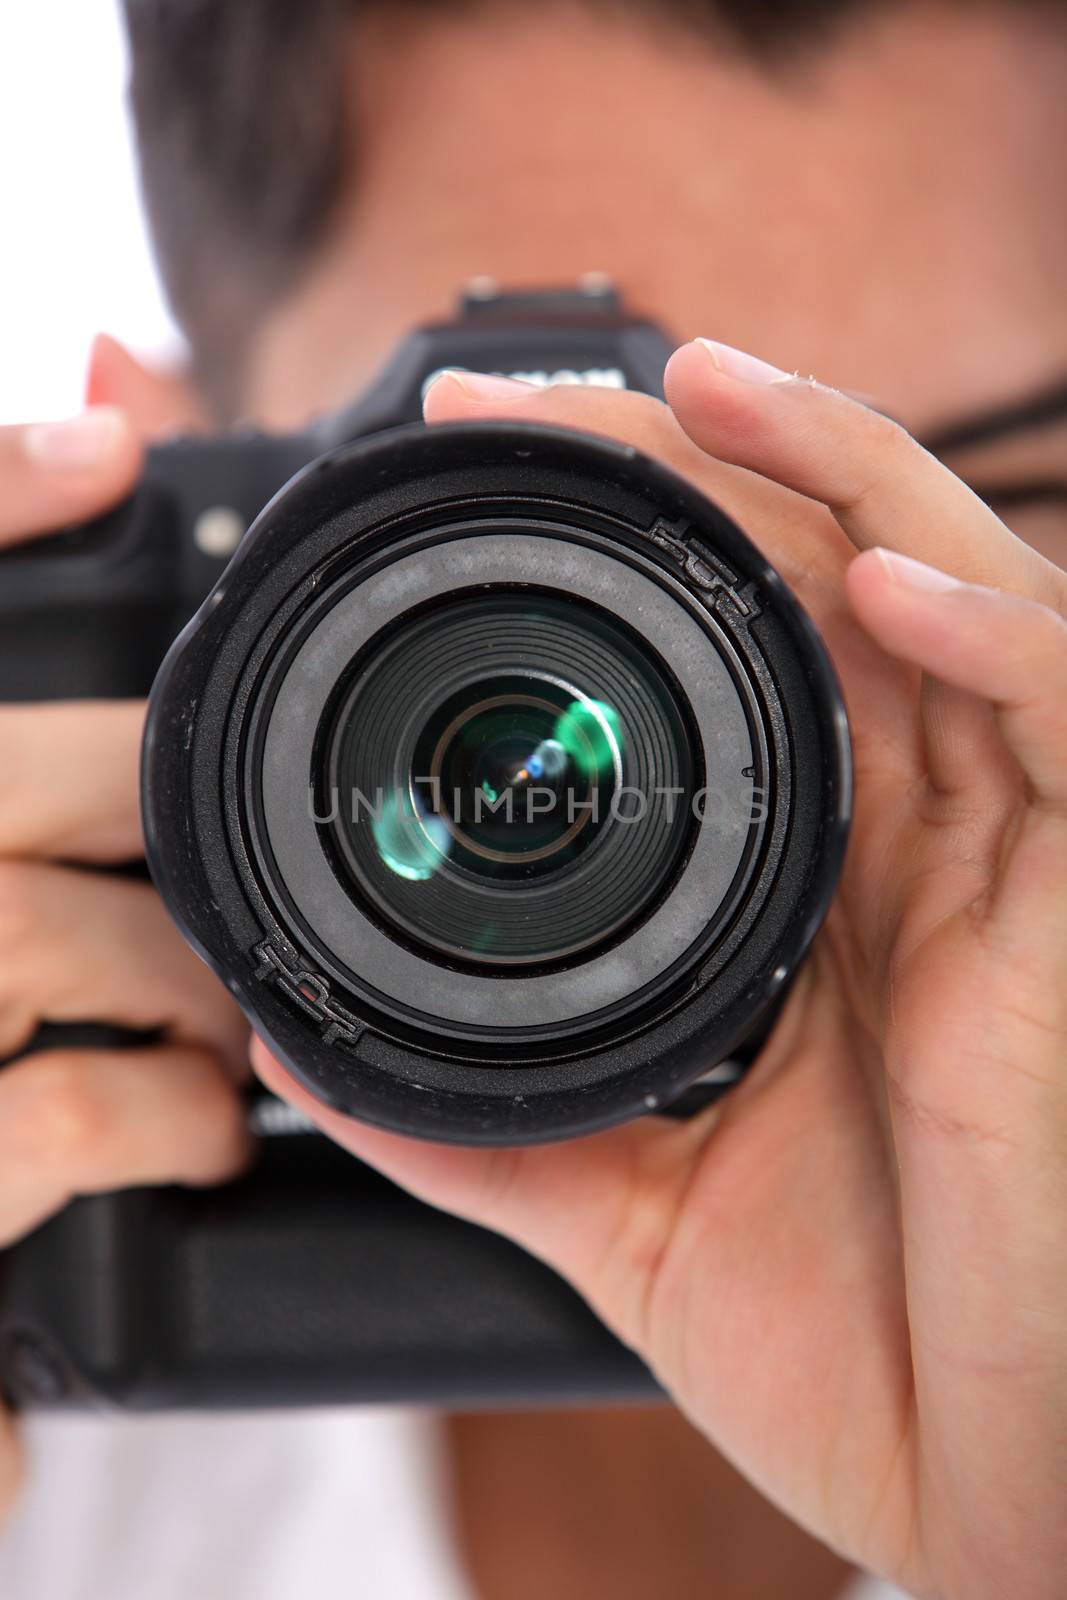 Man focusing his camera with the lens pointed directly at the viewer, close up view